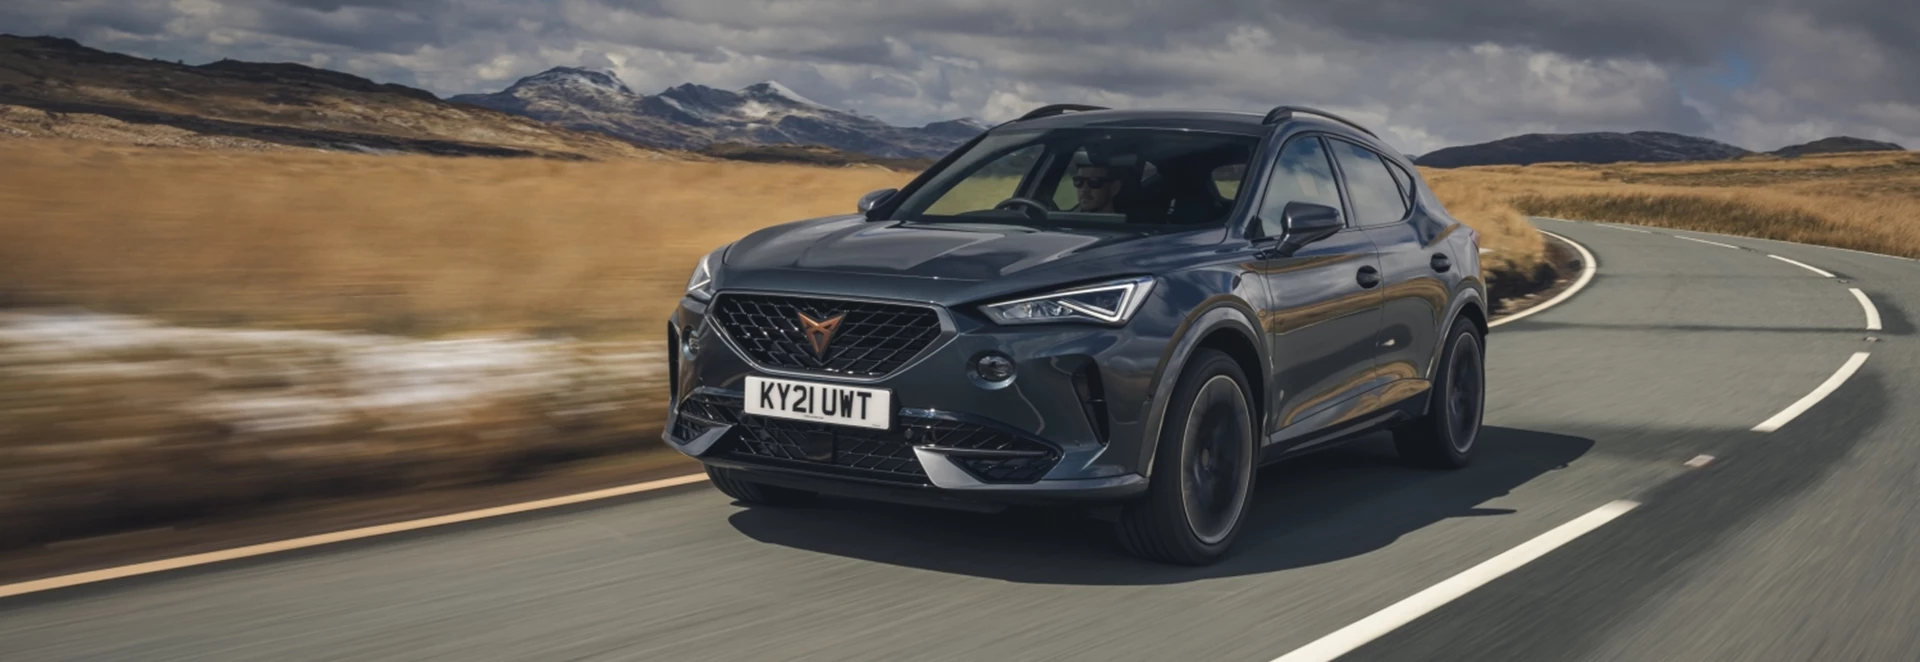 Cupra Formentor: 5 things you need to know about this sporty SUV 